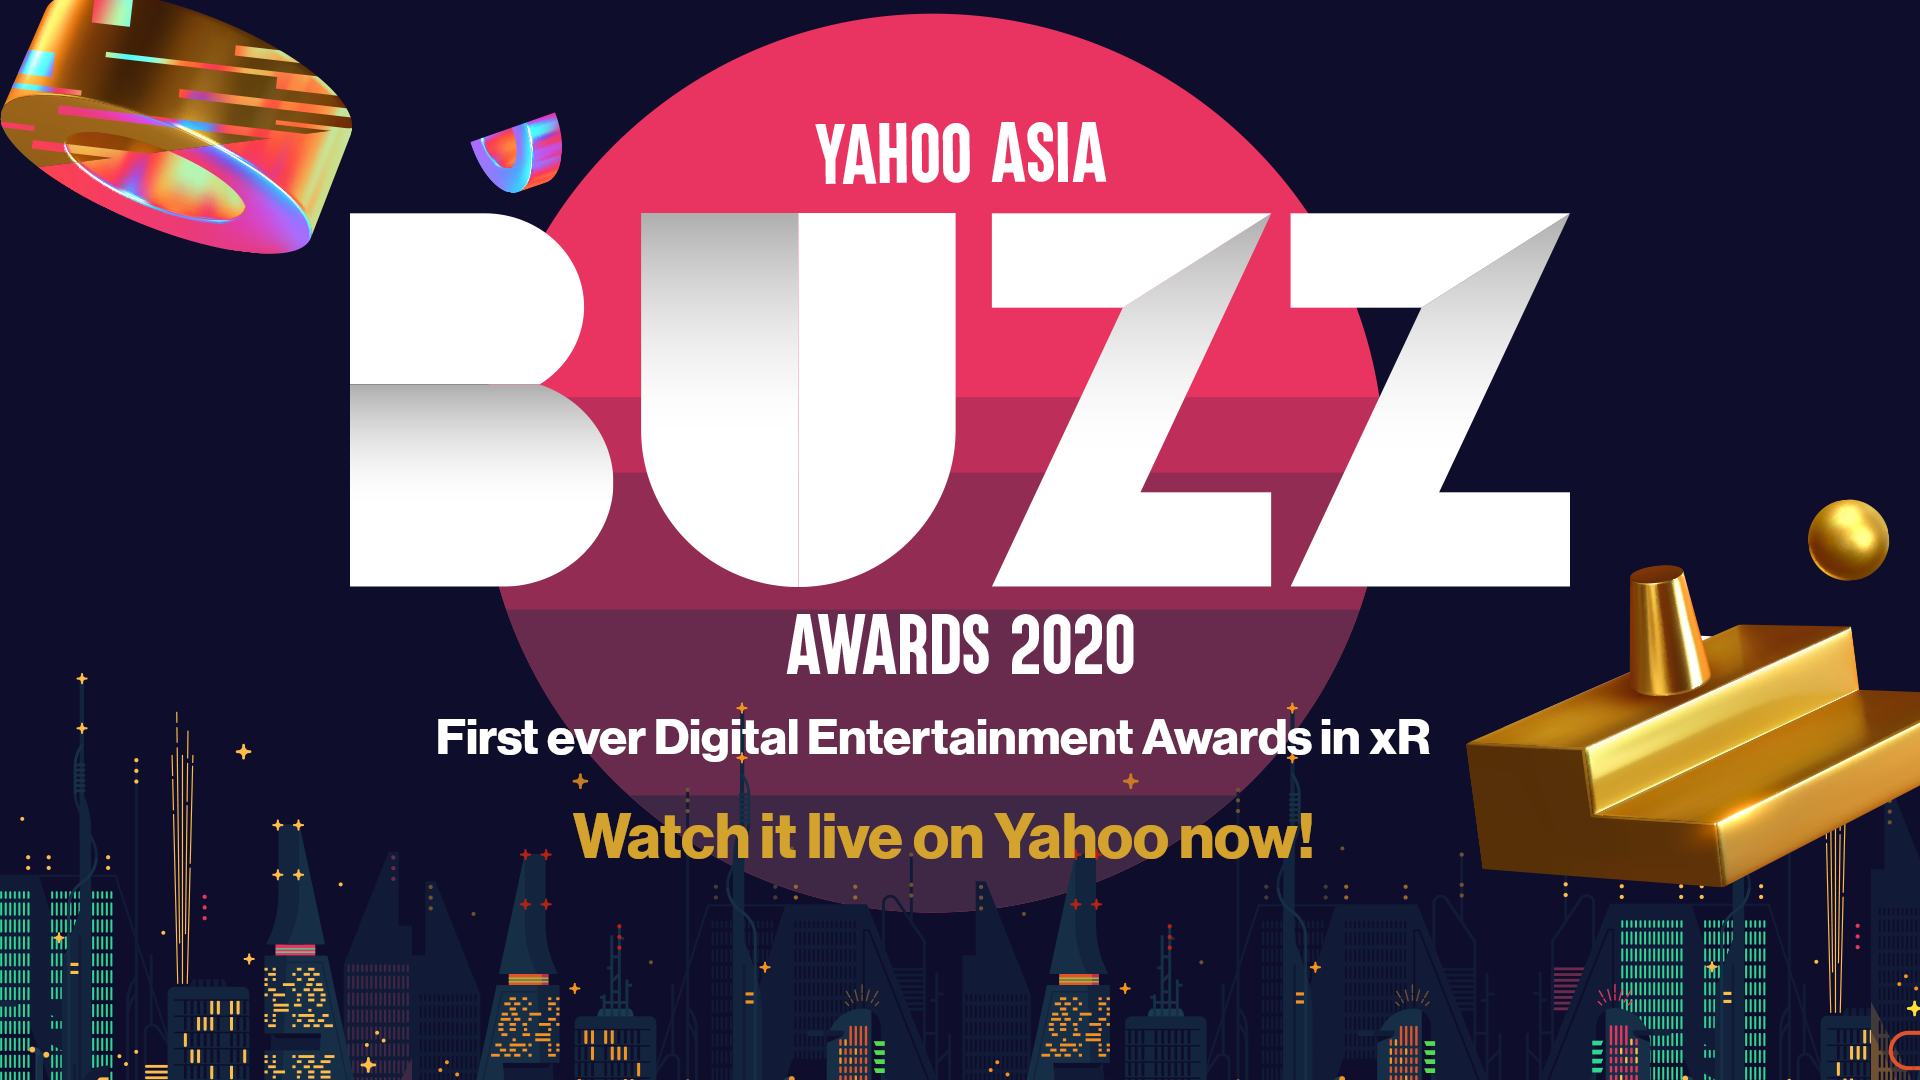 Here's where you can watch Yahoo Asia Buzz Awards xR Live 2020